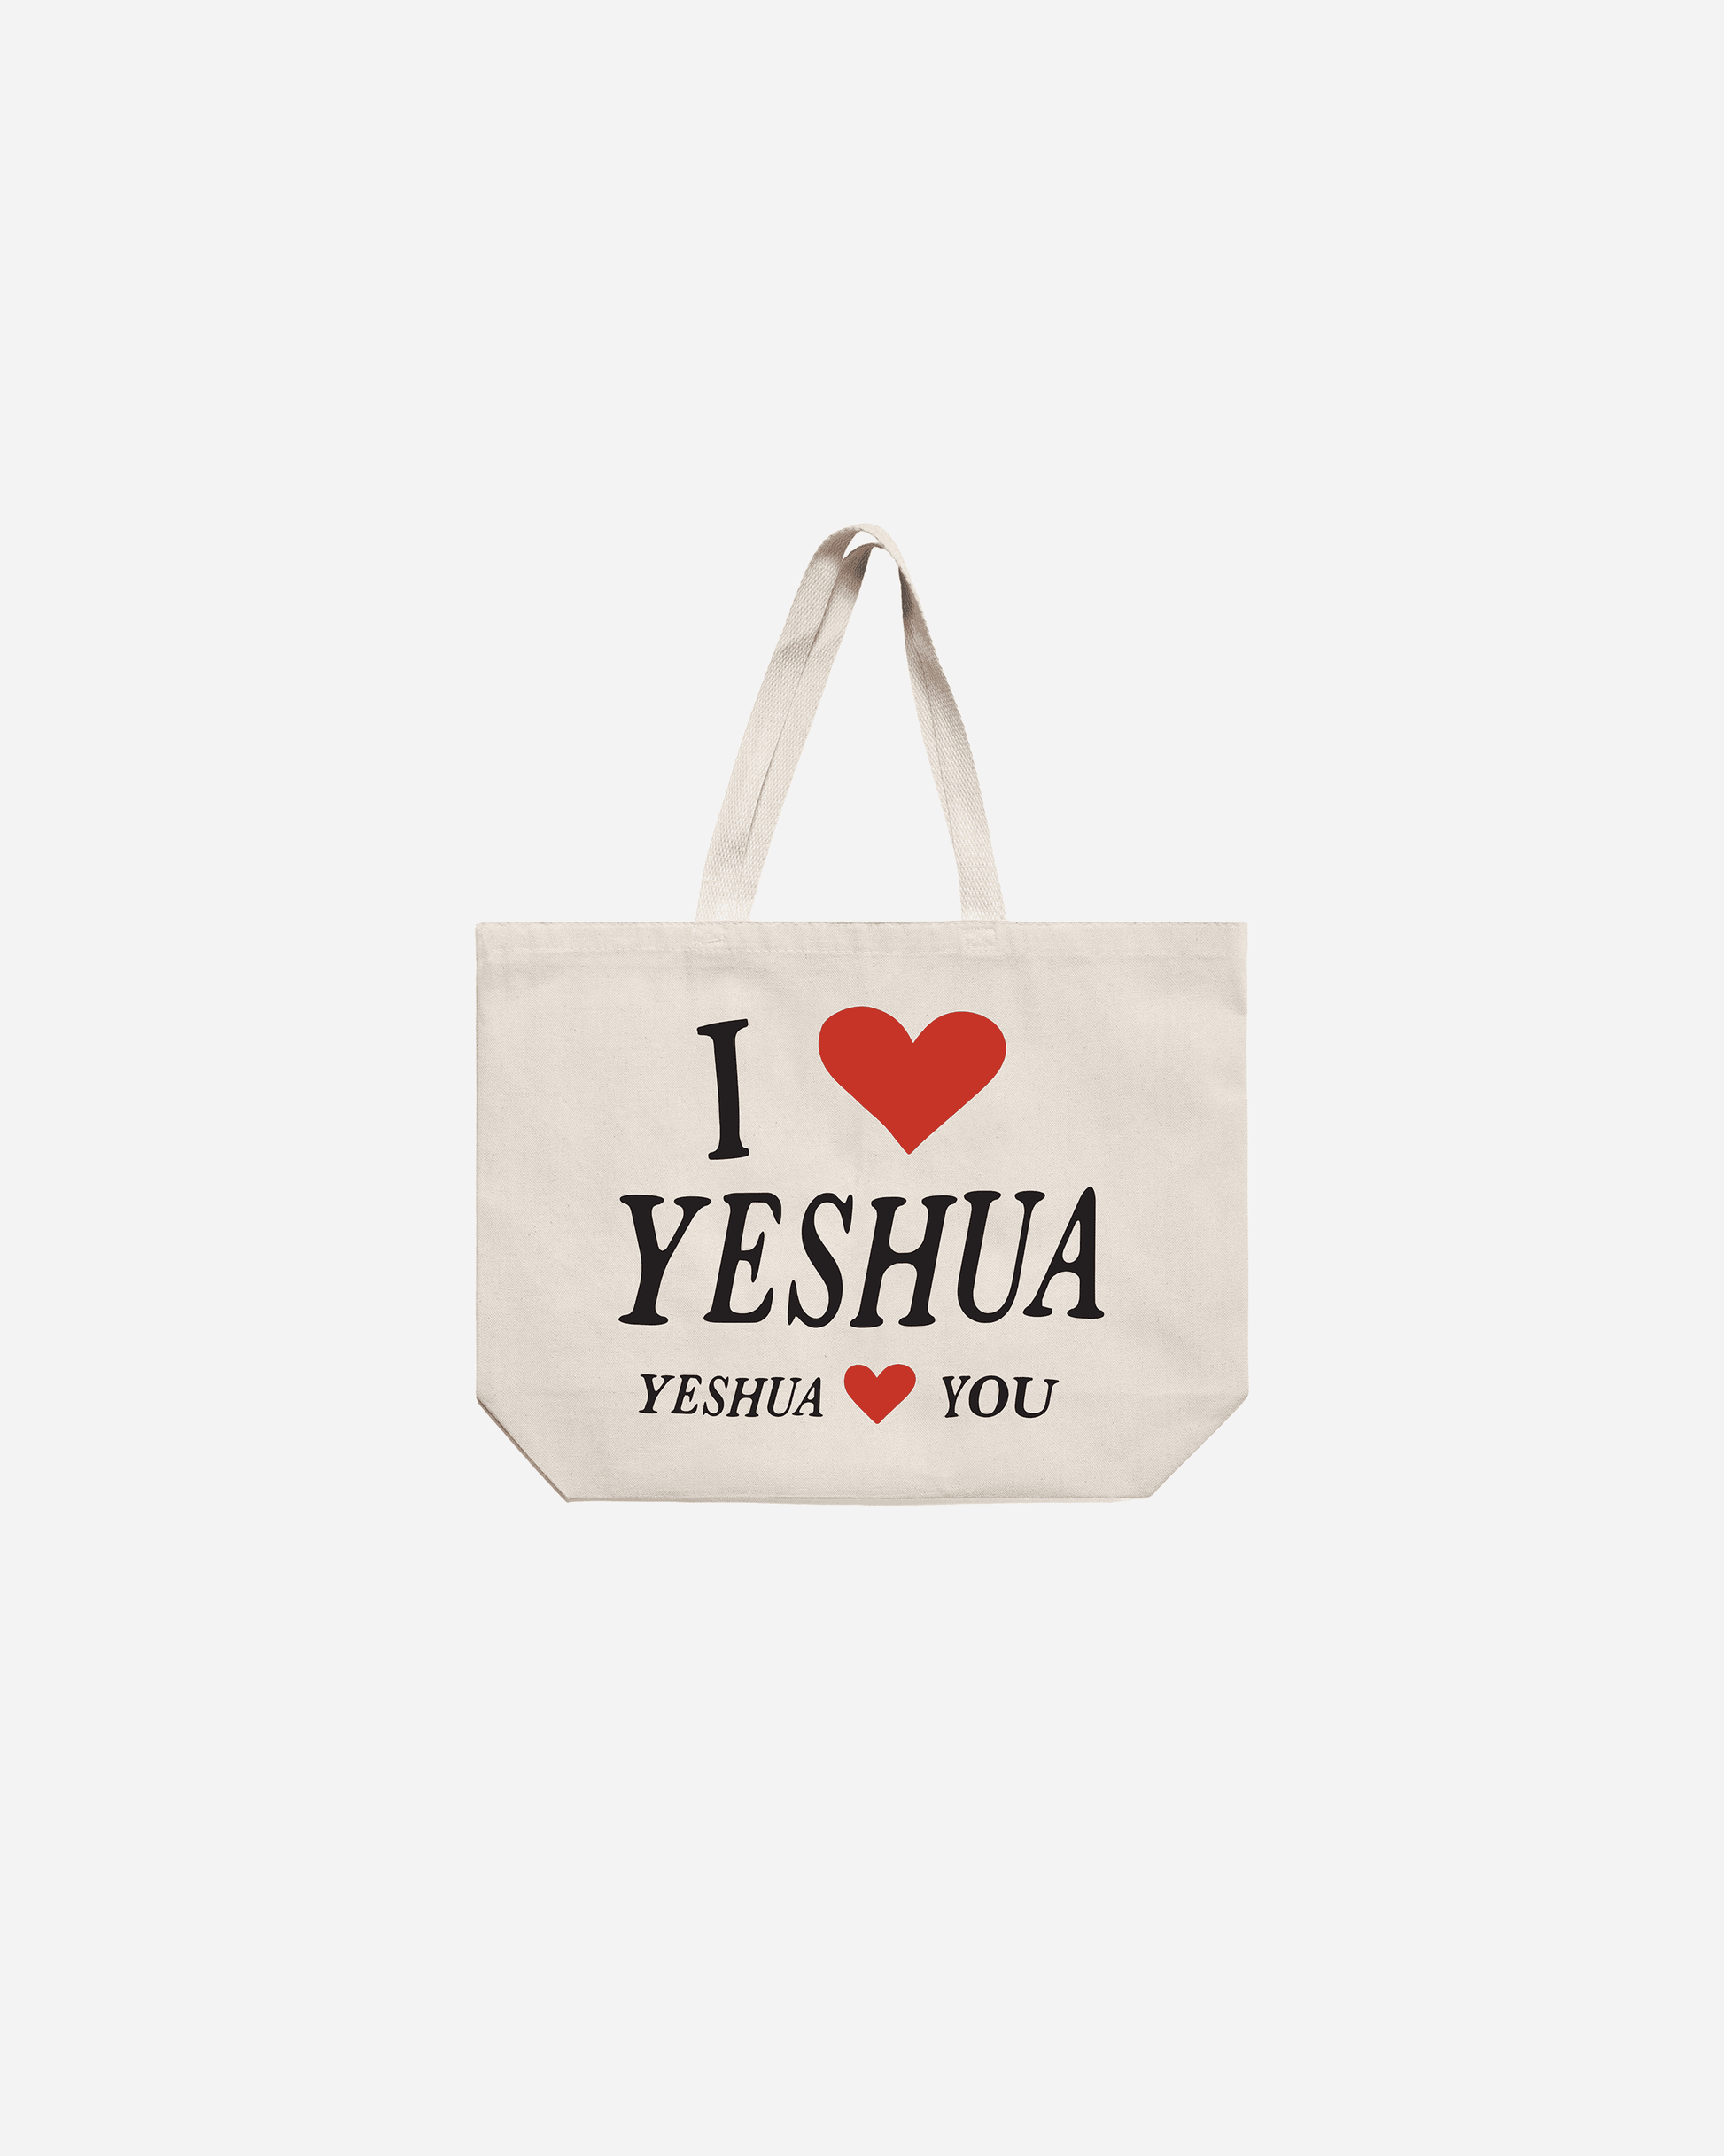 I Love Yeshua, Yeshua loves you tote bagfrom the WWYD (What Would Yeshua Do) collection. Christian shirts from NHIM Apparel. All glory to Yeshua! NHIM Apparel christian clothing brand